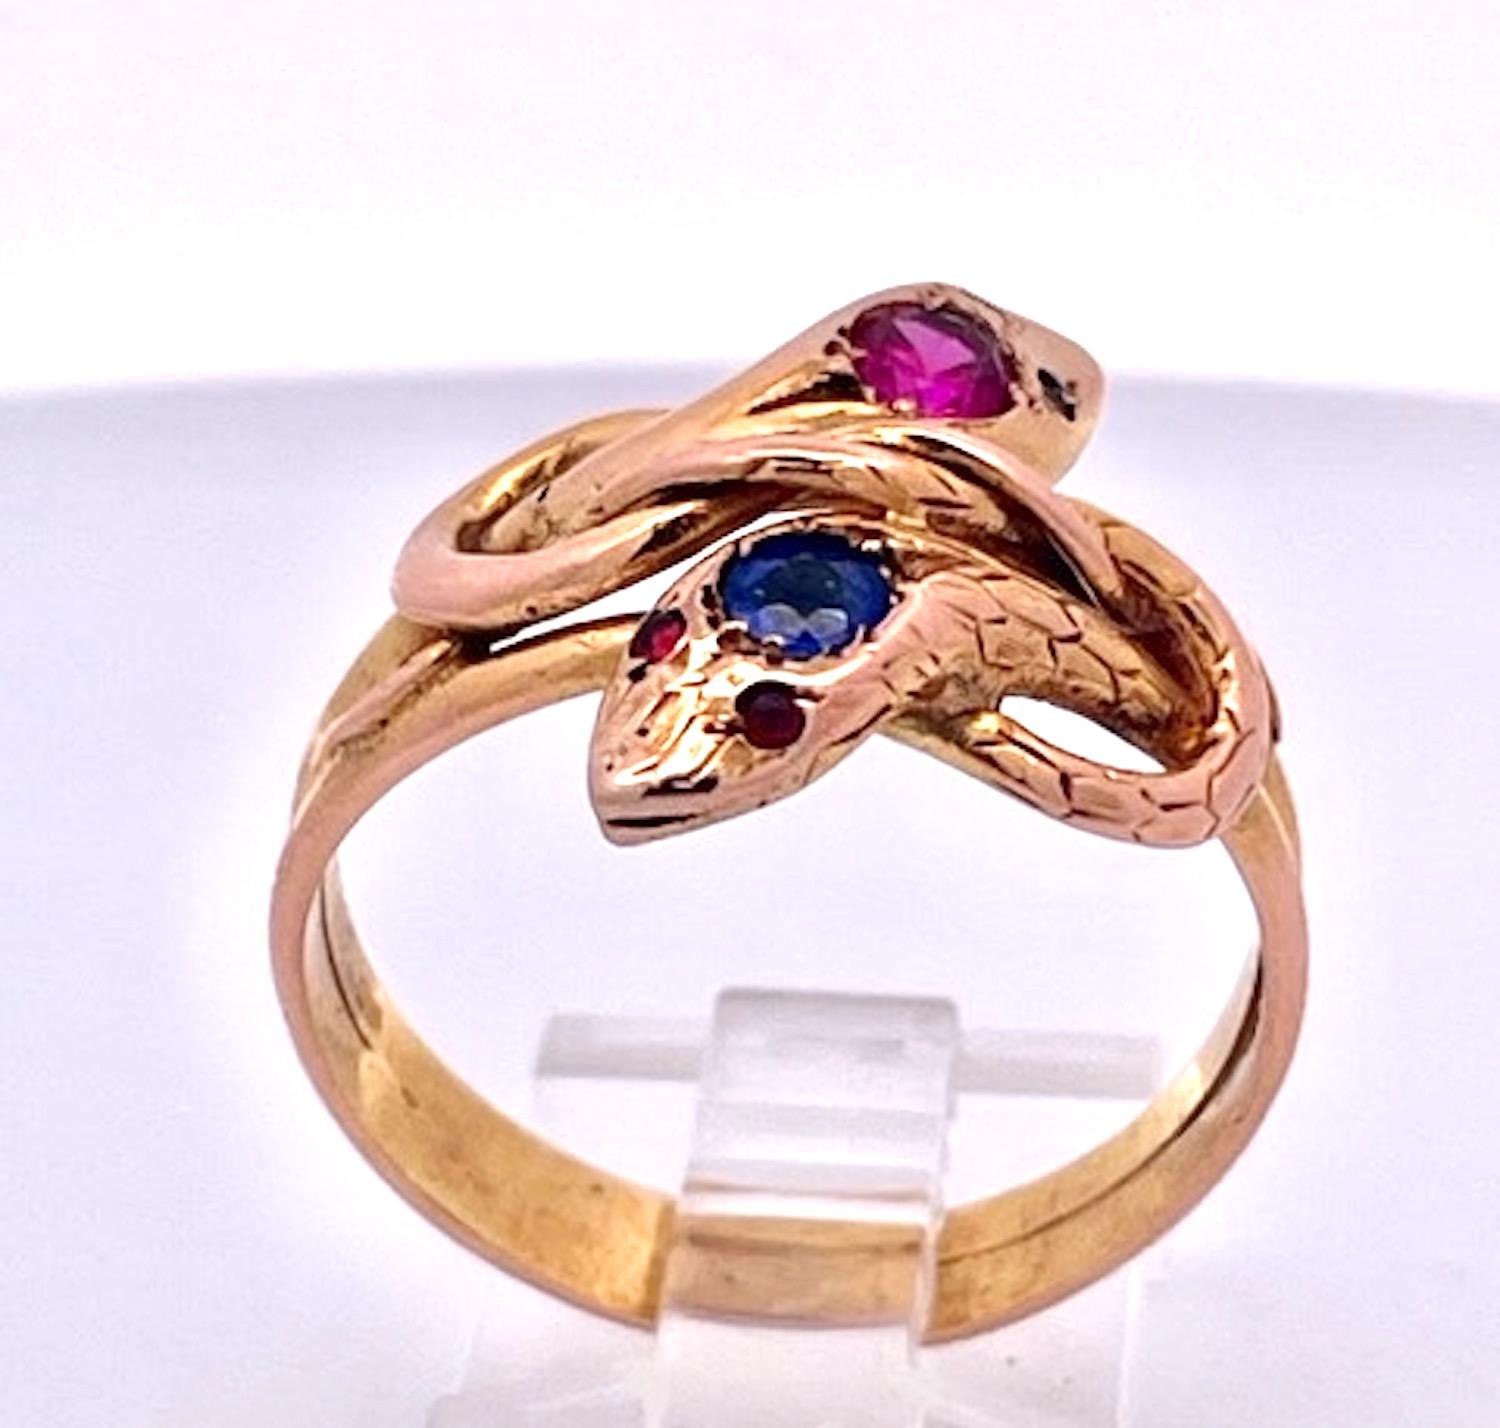 This lovely snake ring goes so well with the listed bracelet in another of my listing.  This double snake ring has 1 Pink Sapphire and the other has 1 Blue Sapphire on the head.  I believe these to be synthetic stones because they were not tested